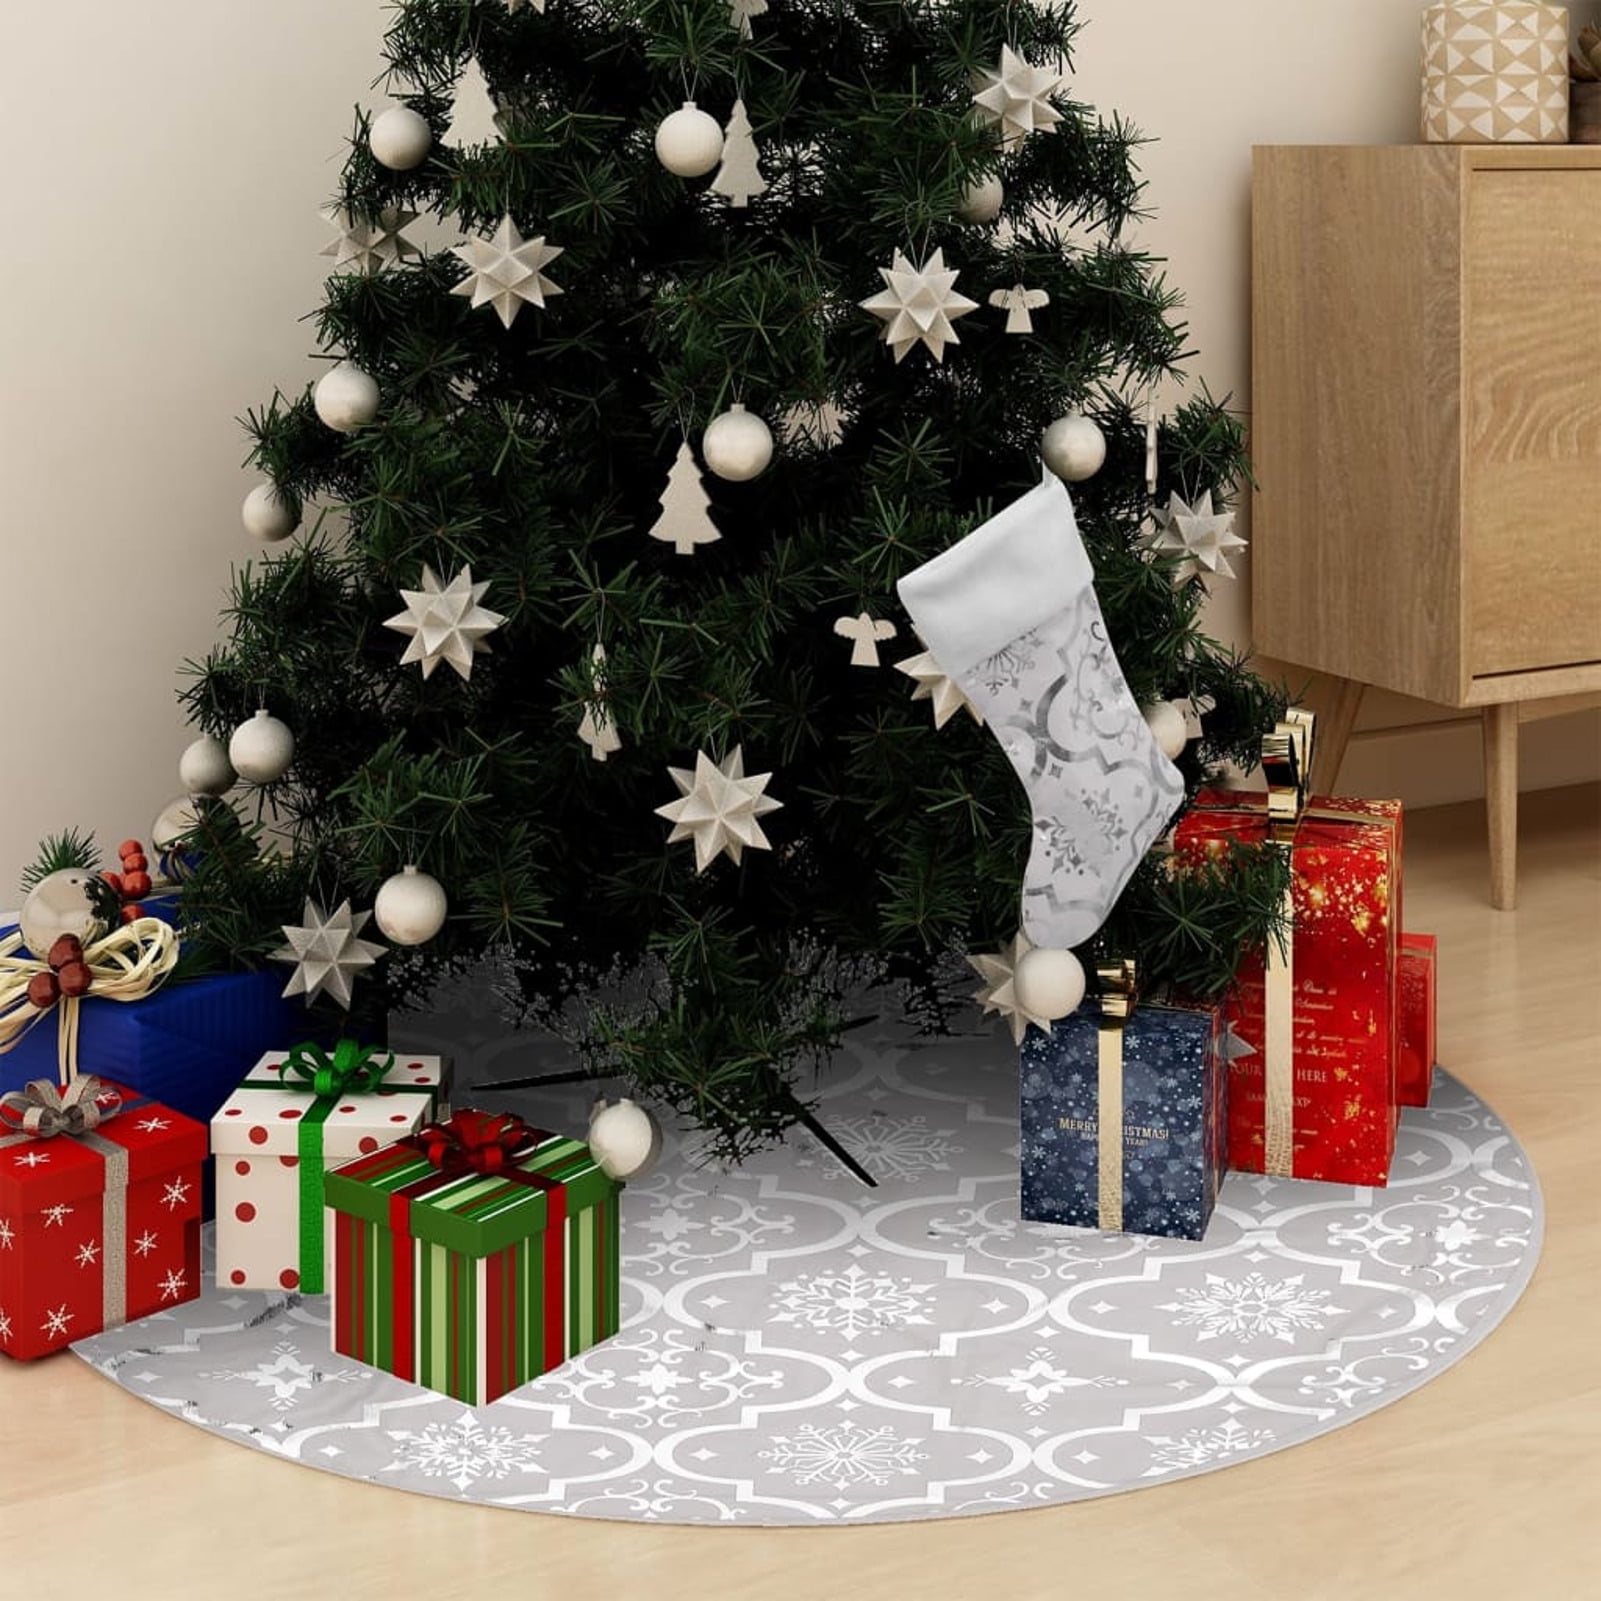 48 inch Details about   Christmas Tree Skirt Mat Party Snow Mat Cover Home Party Xmas Decor 36 